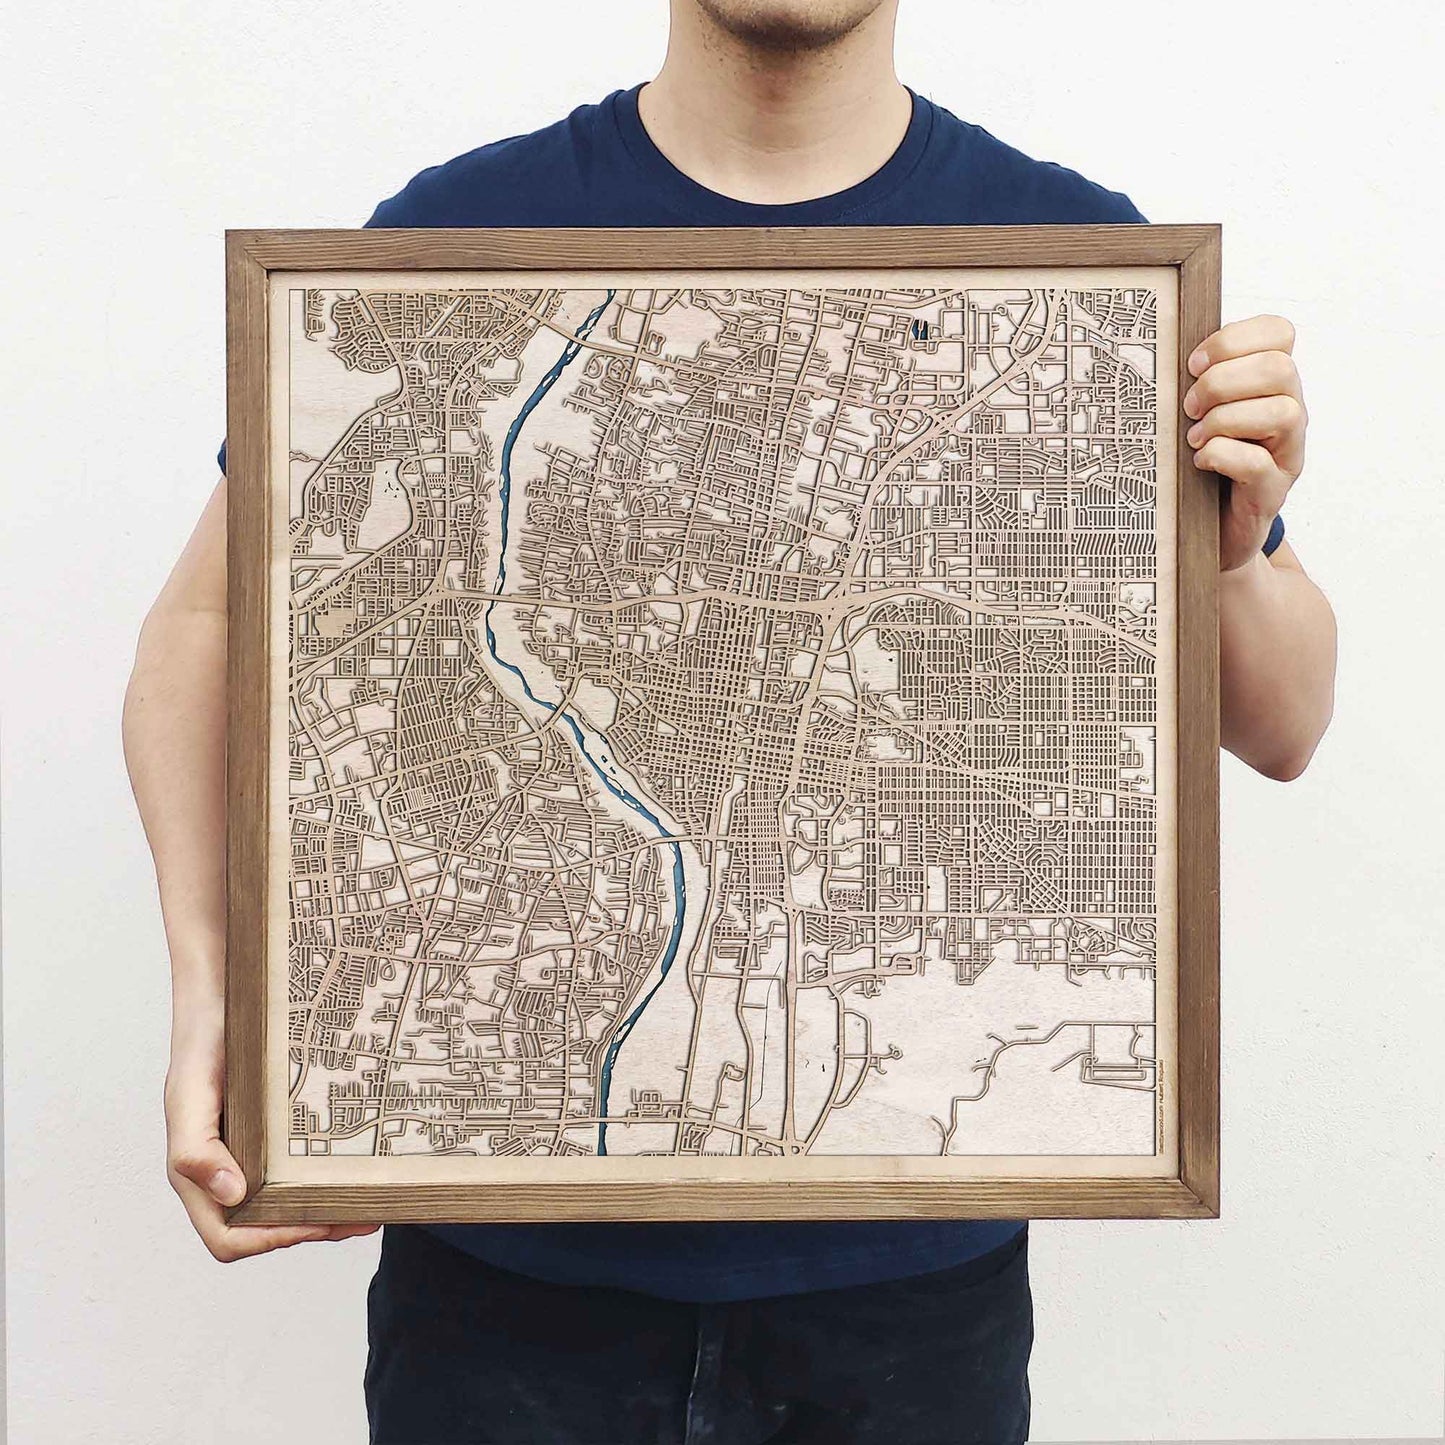 Albuquerque Wooden Map by CityWood - Custom Wood Map Art - Unique Laser Cut Engraved - Anniversary Gift